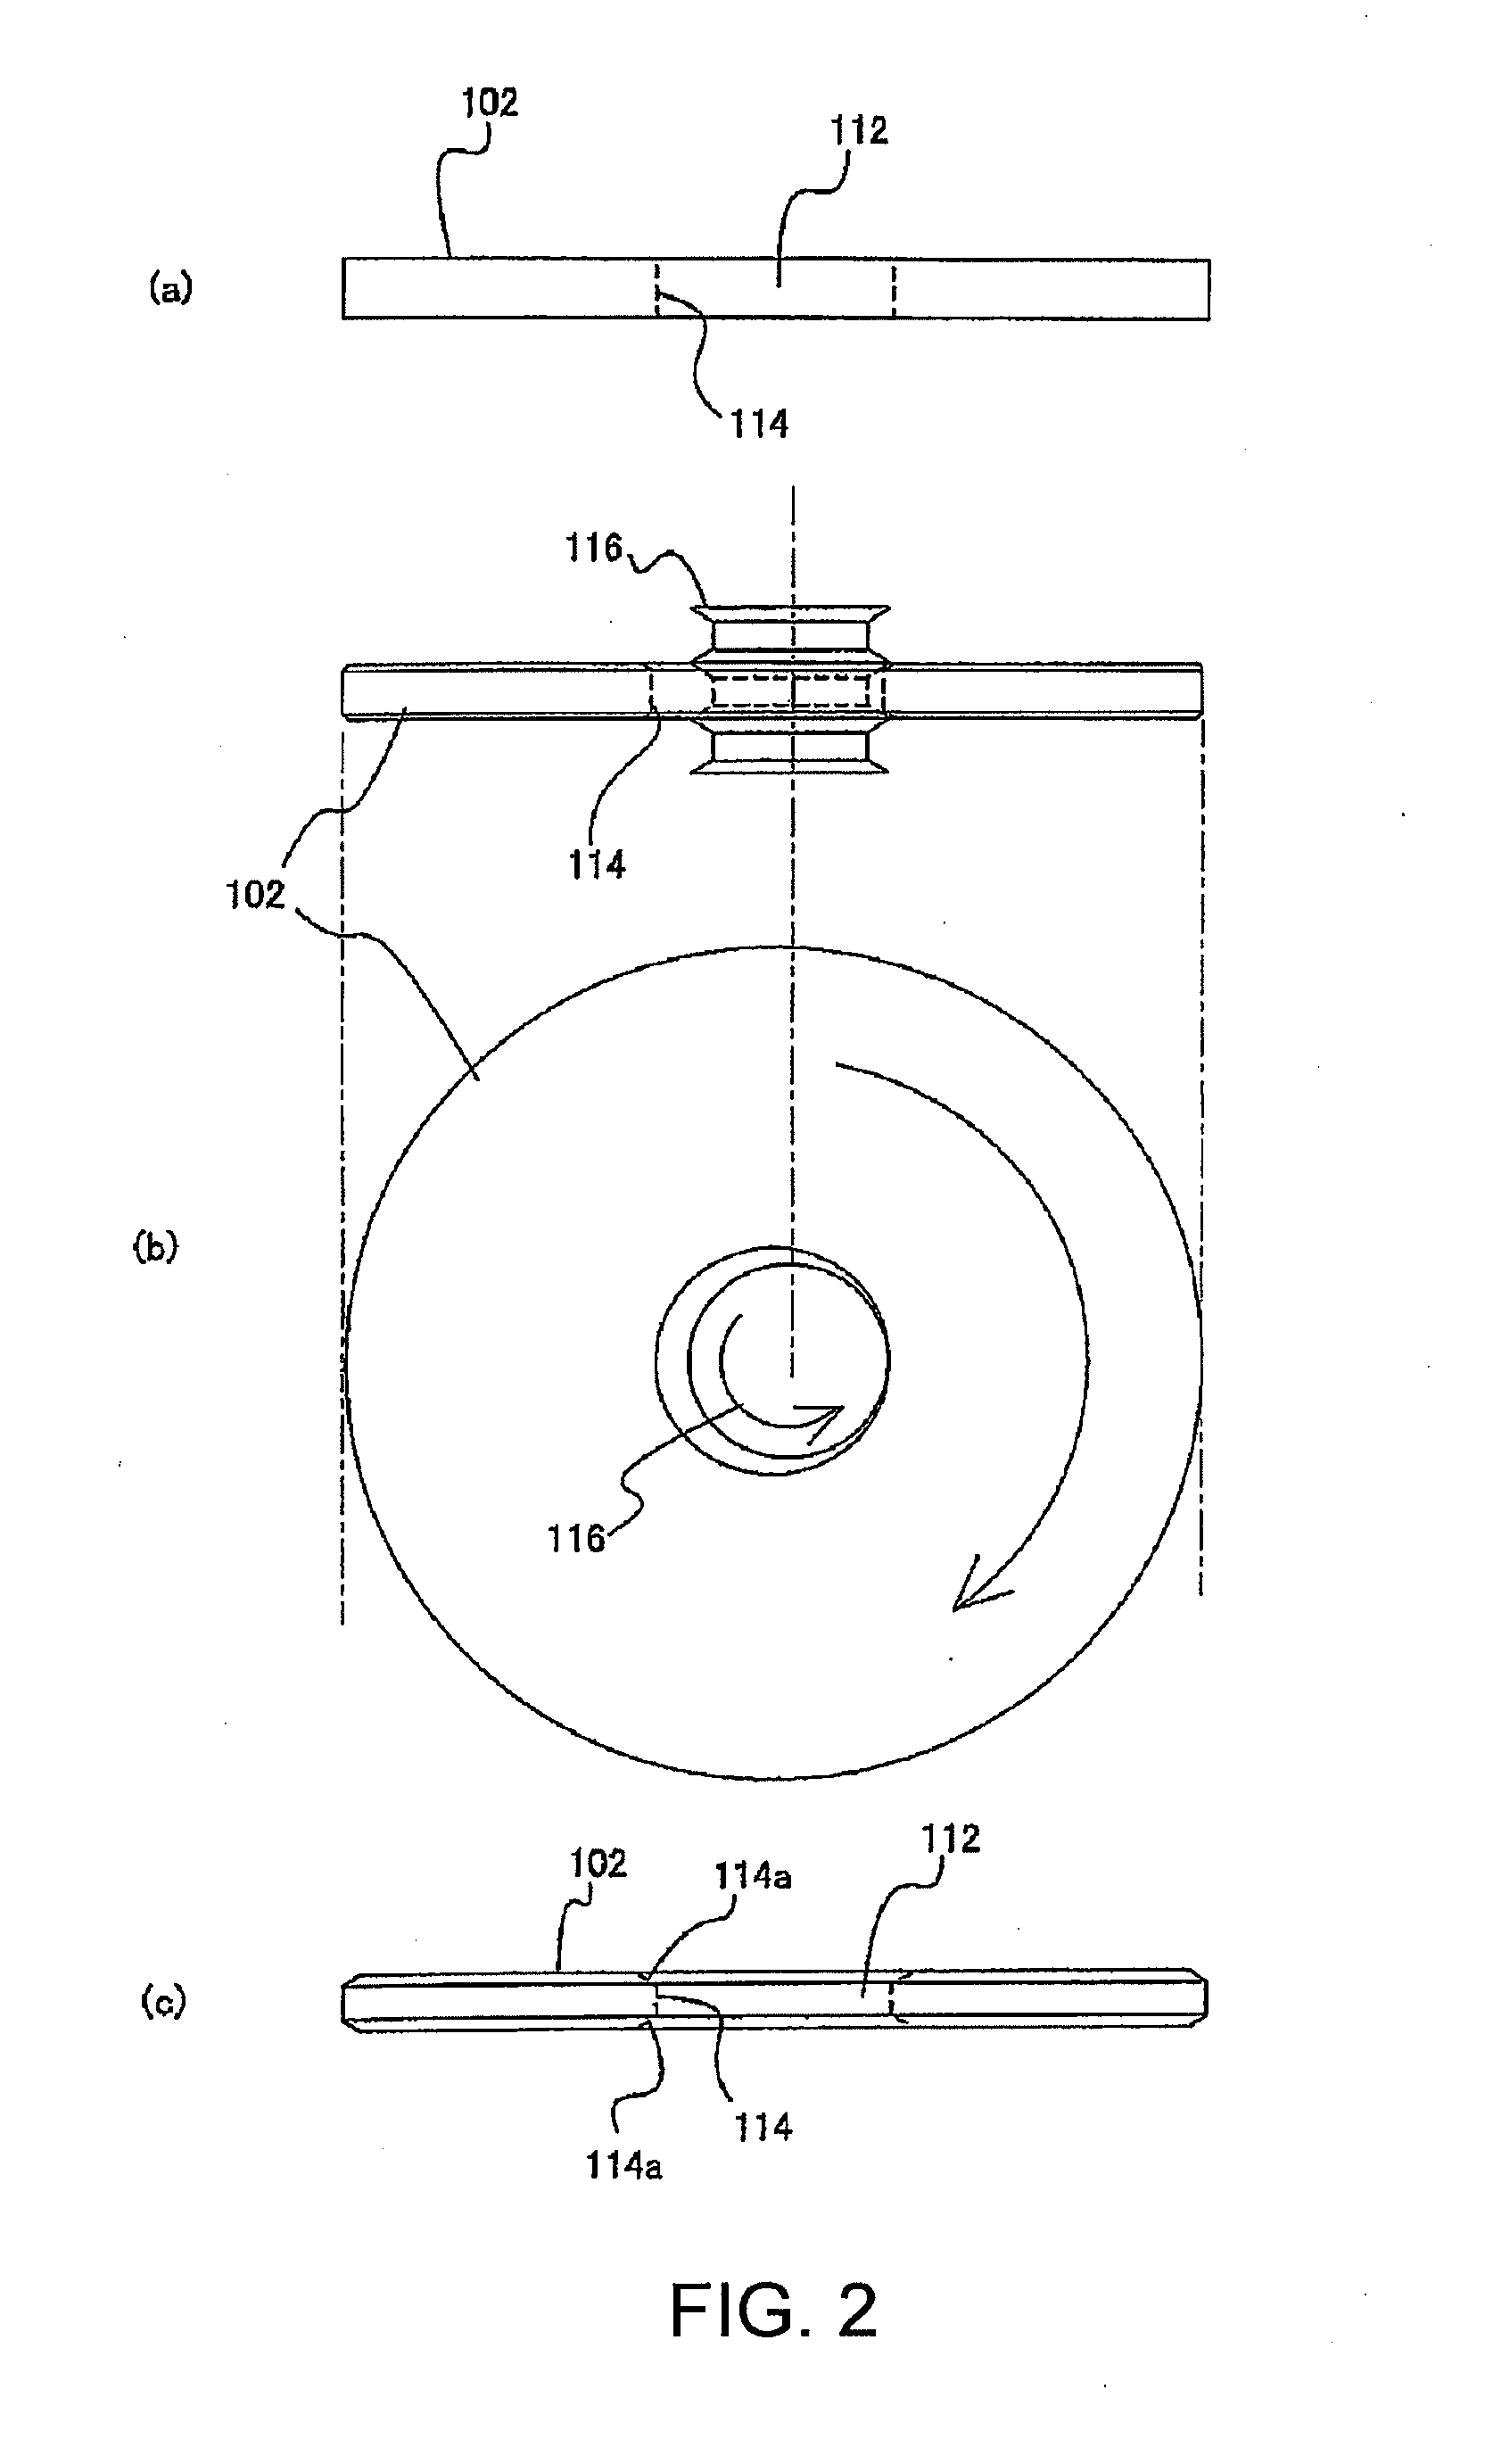 Method of manufacturing glass substrate for magnetic disk and system for manufacturing glass substrate for magnetic disk